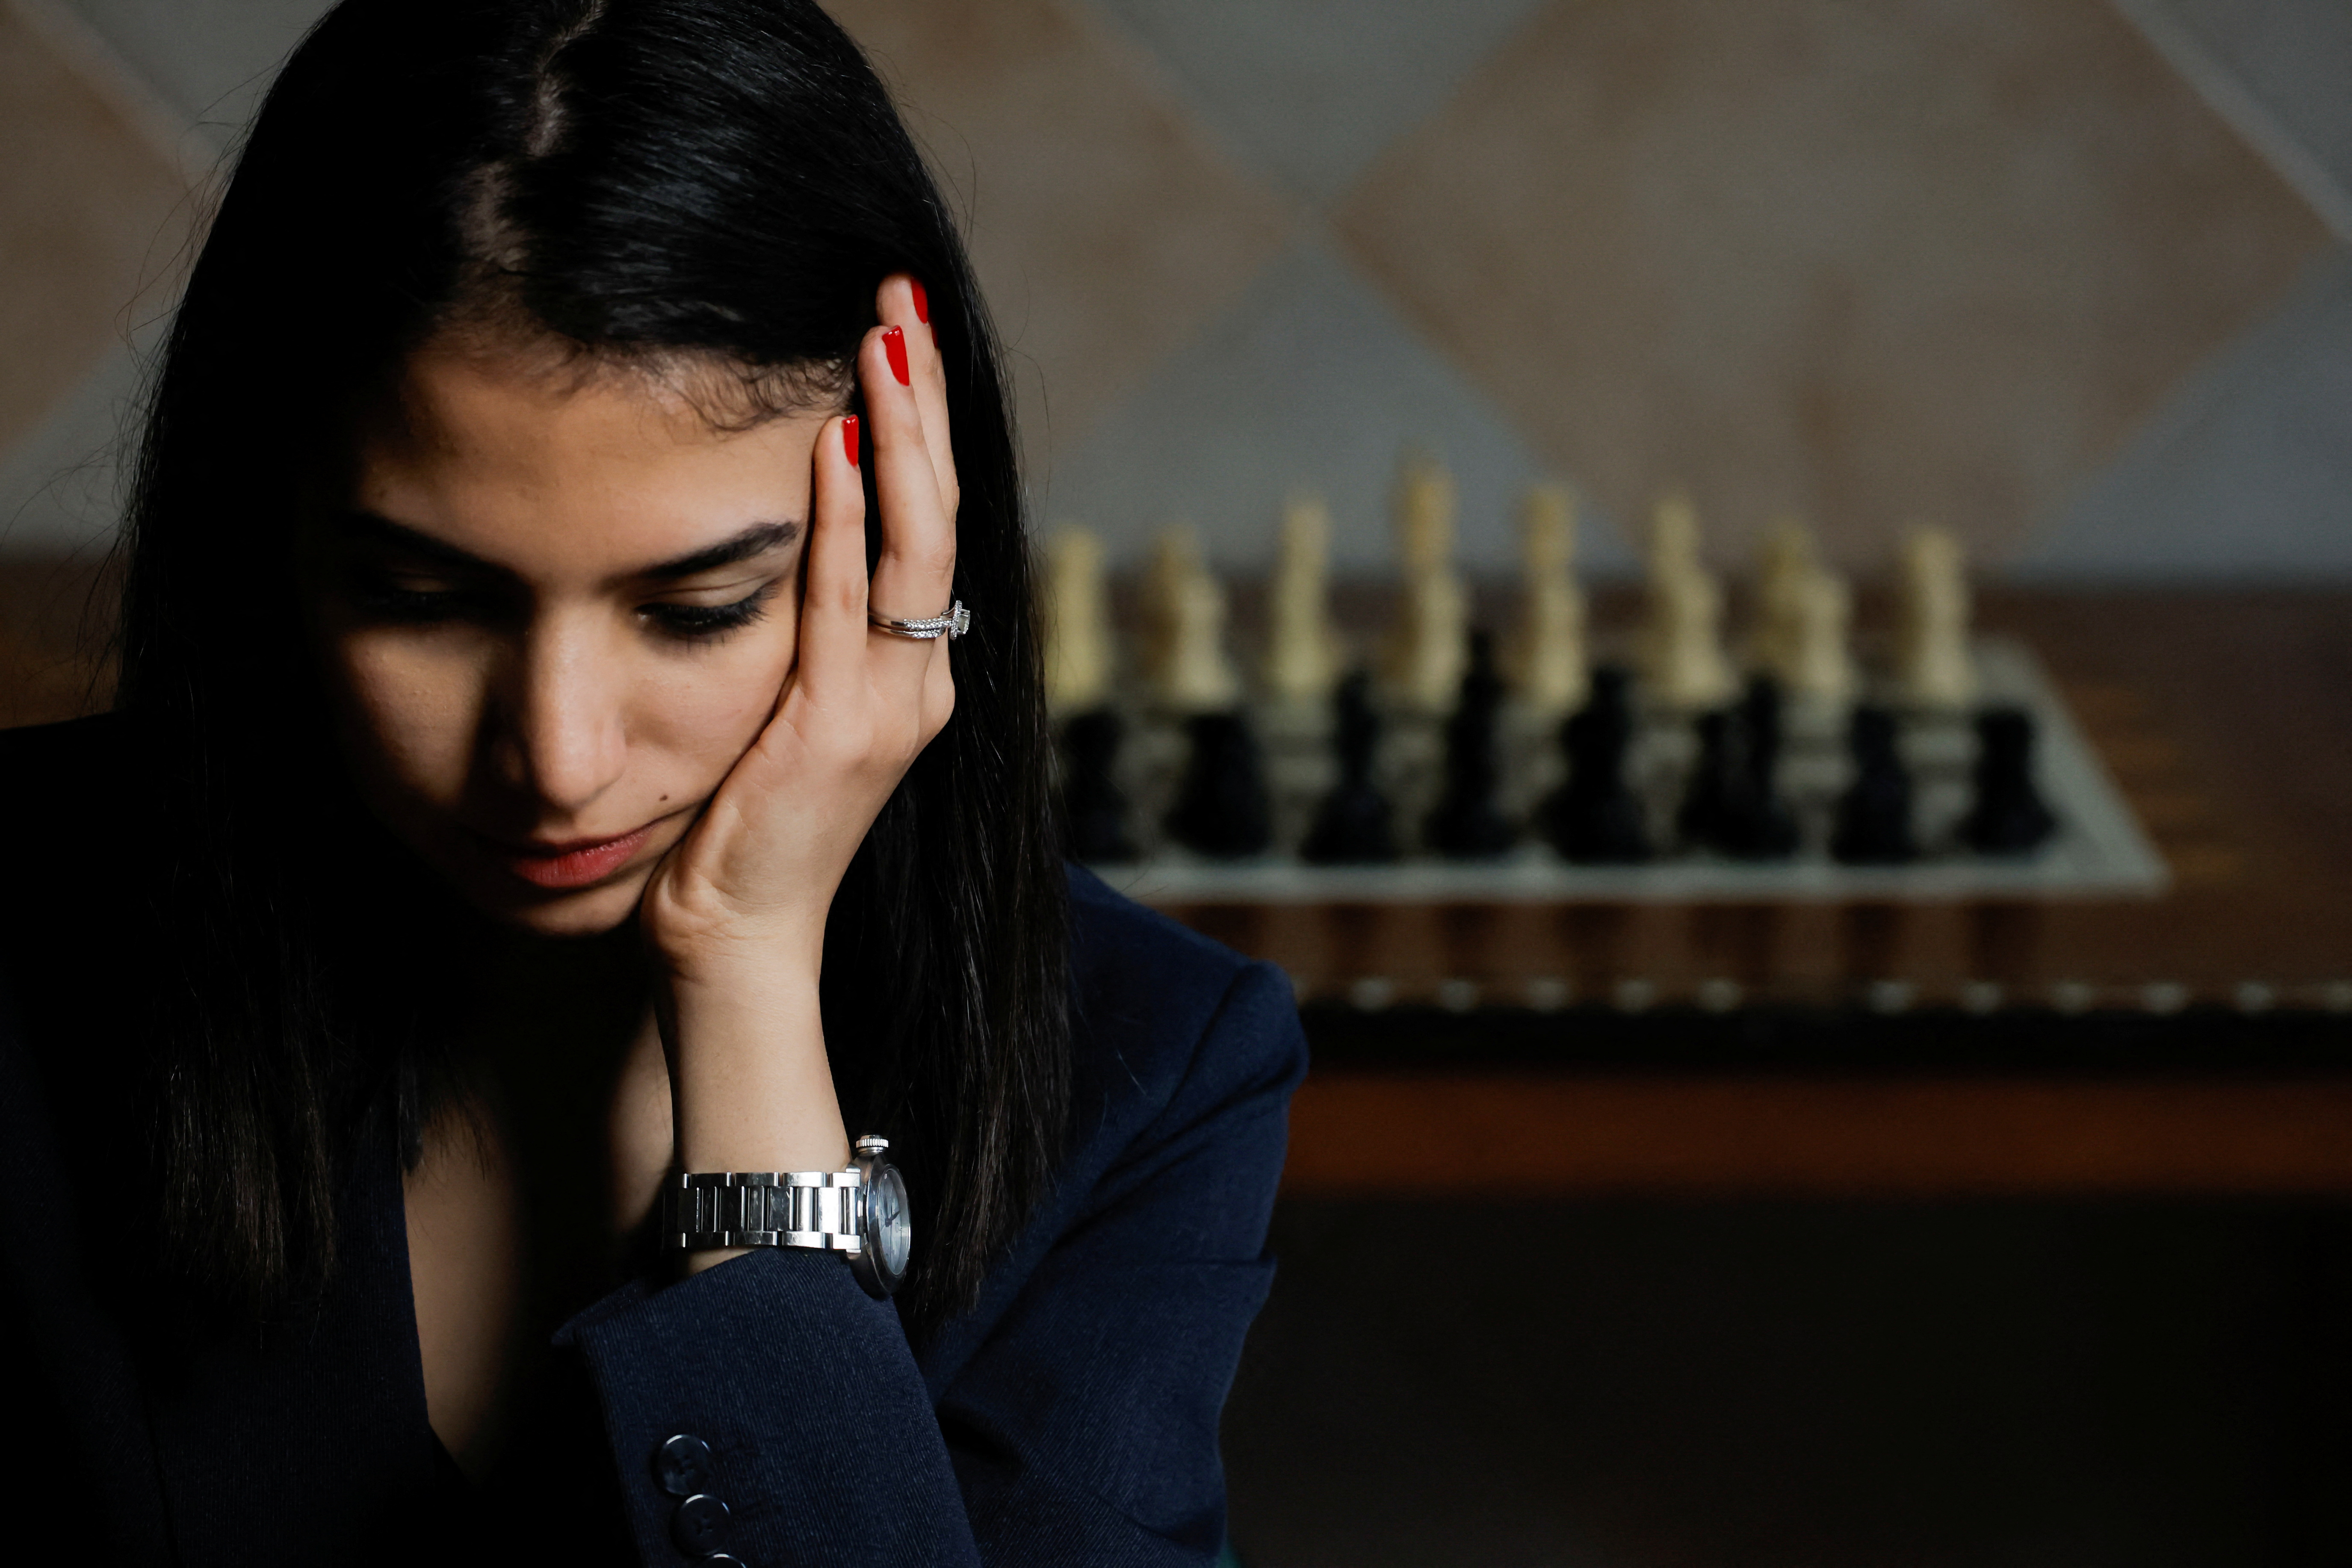 Iranian chess player 'moving to Spain' after competing without headscarf, Iran